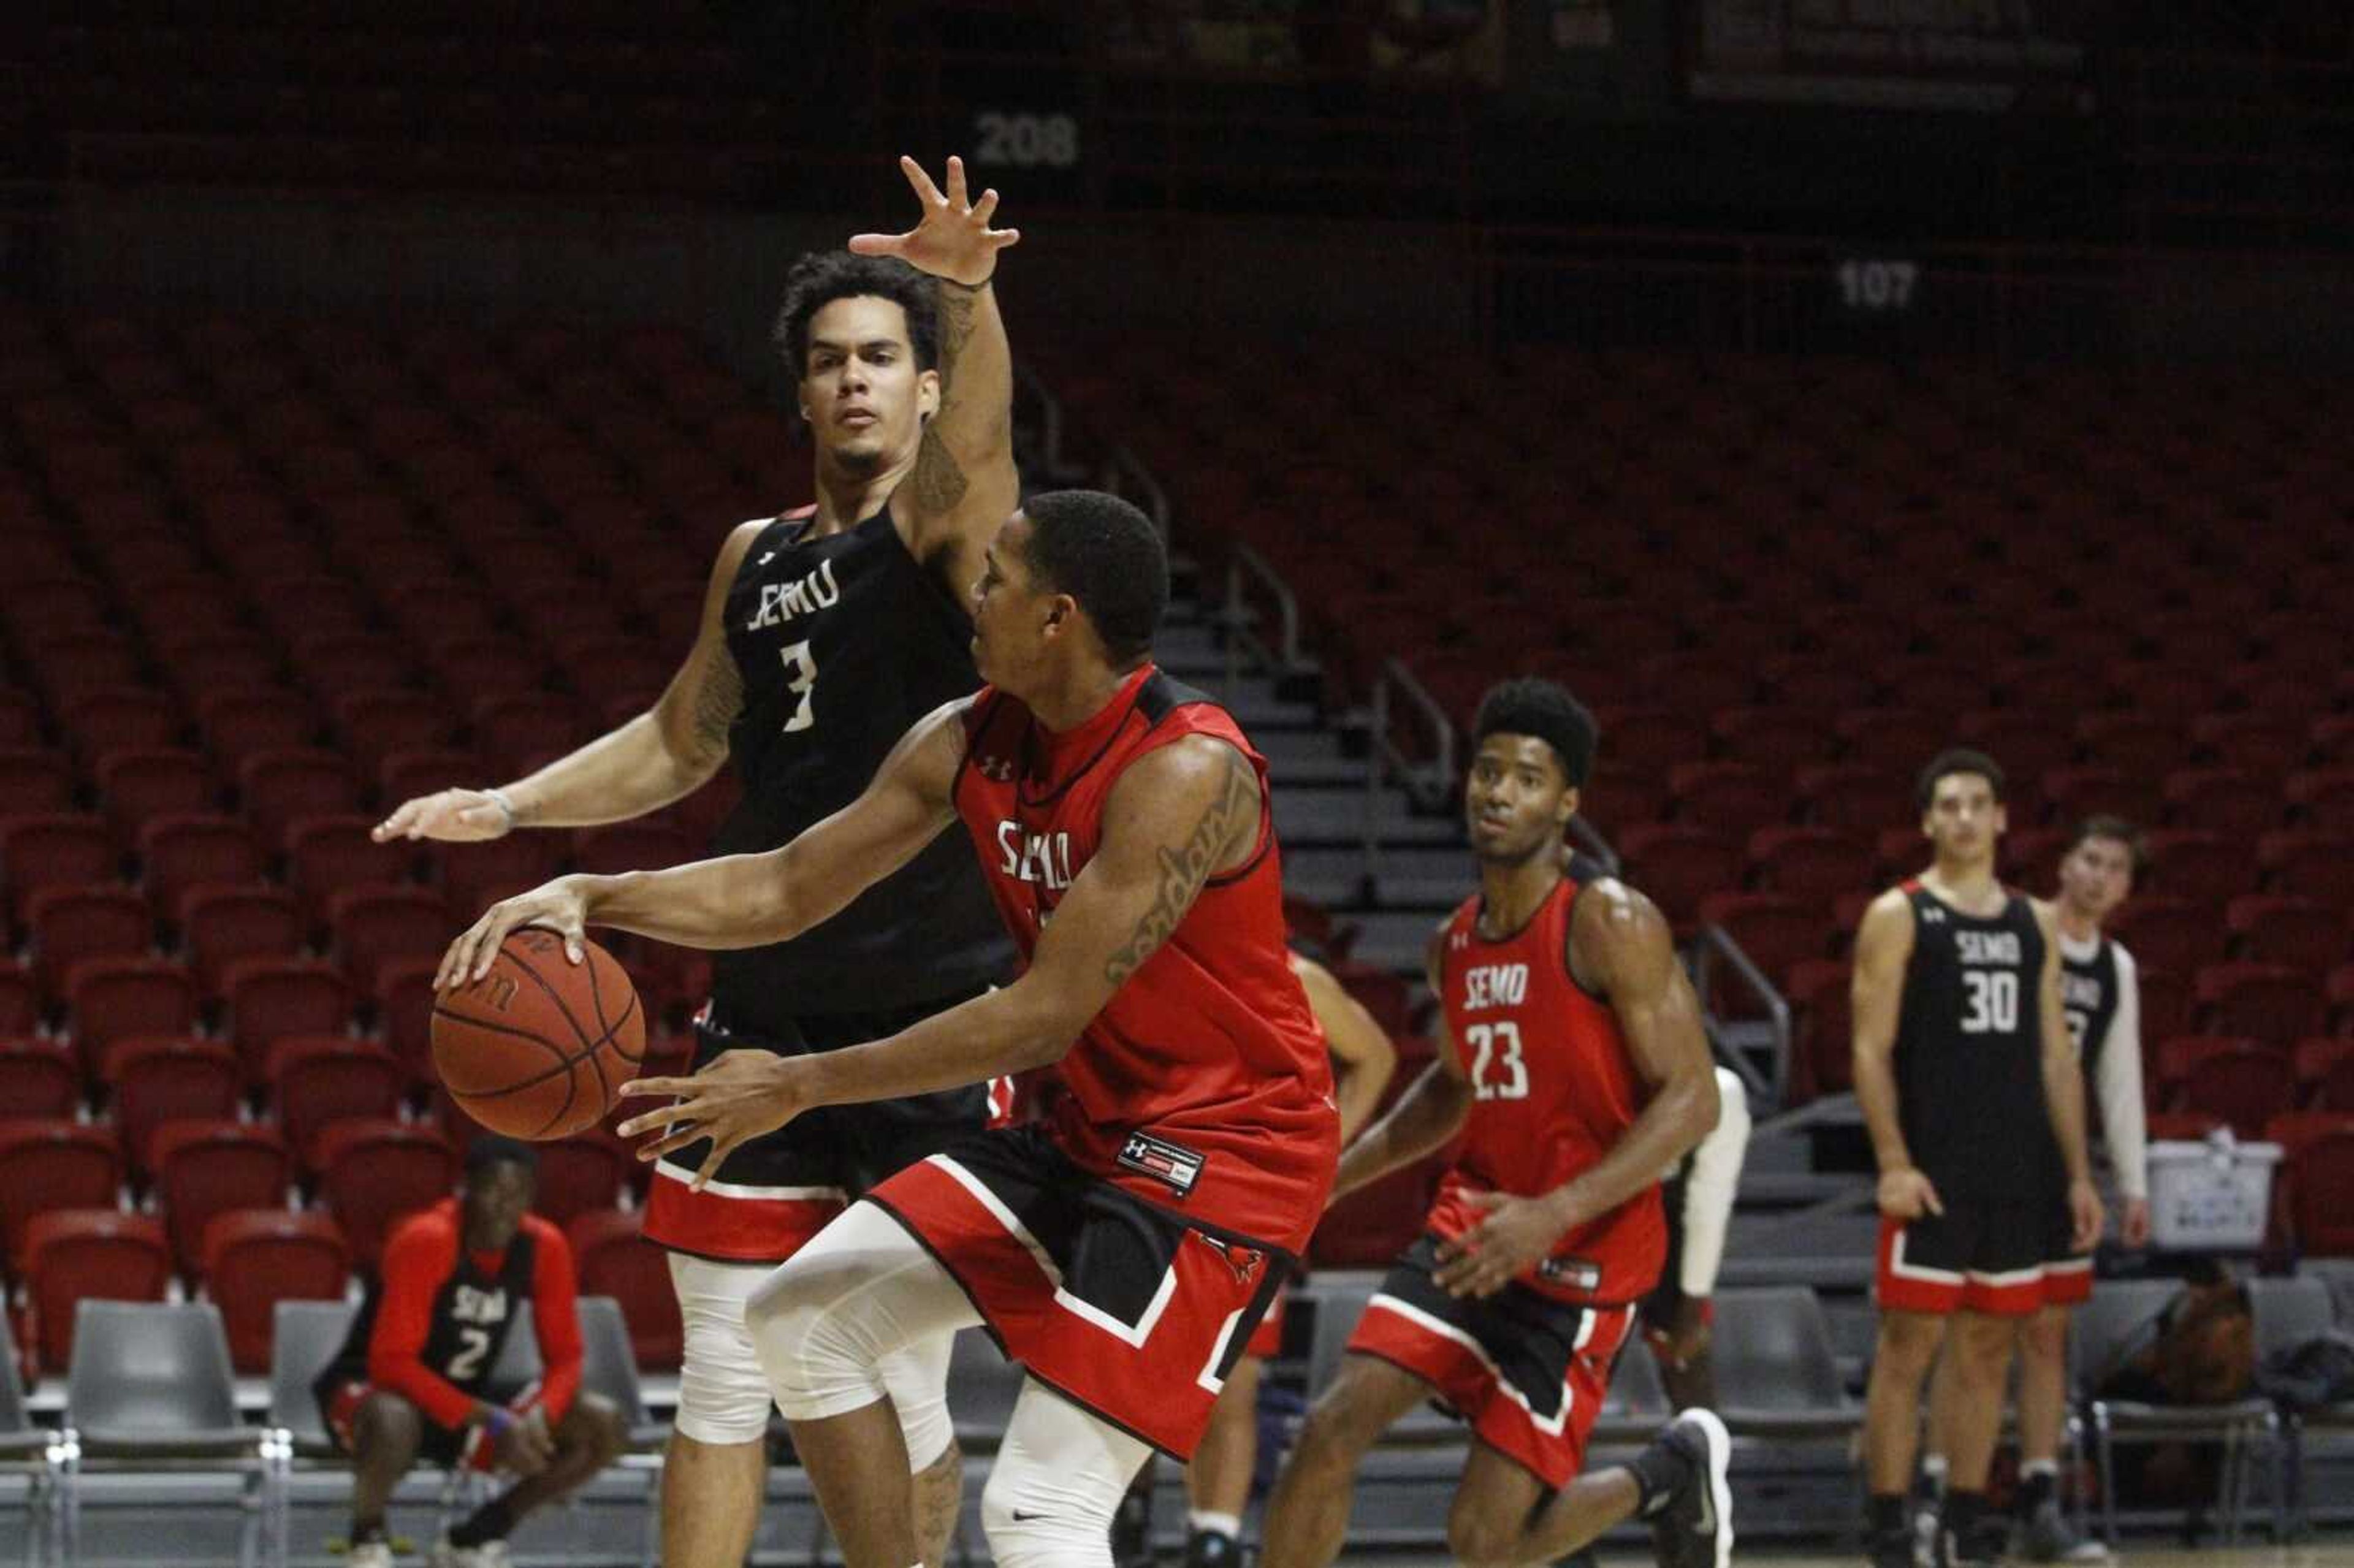 Redhawks finish 2-1 in South Alabama Tournament